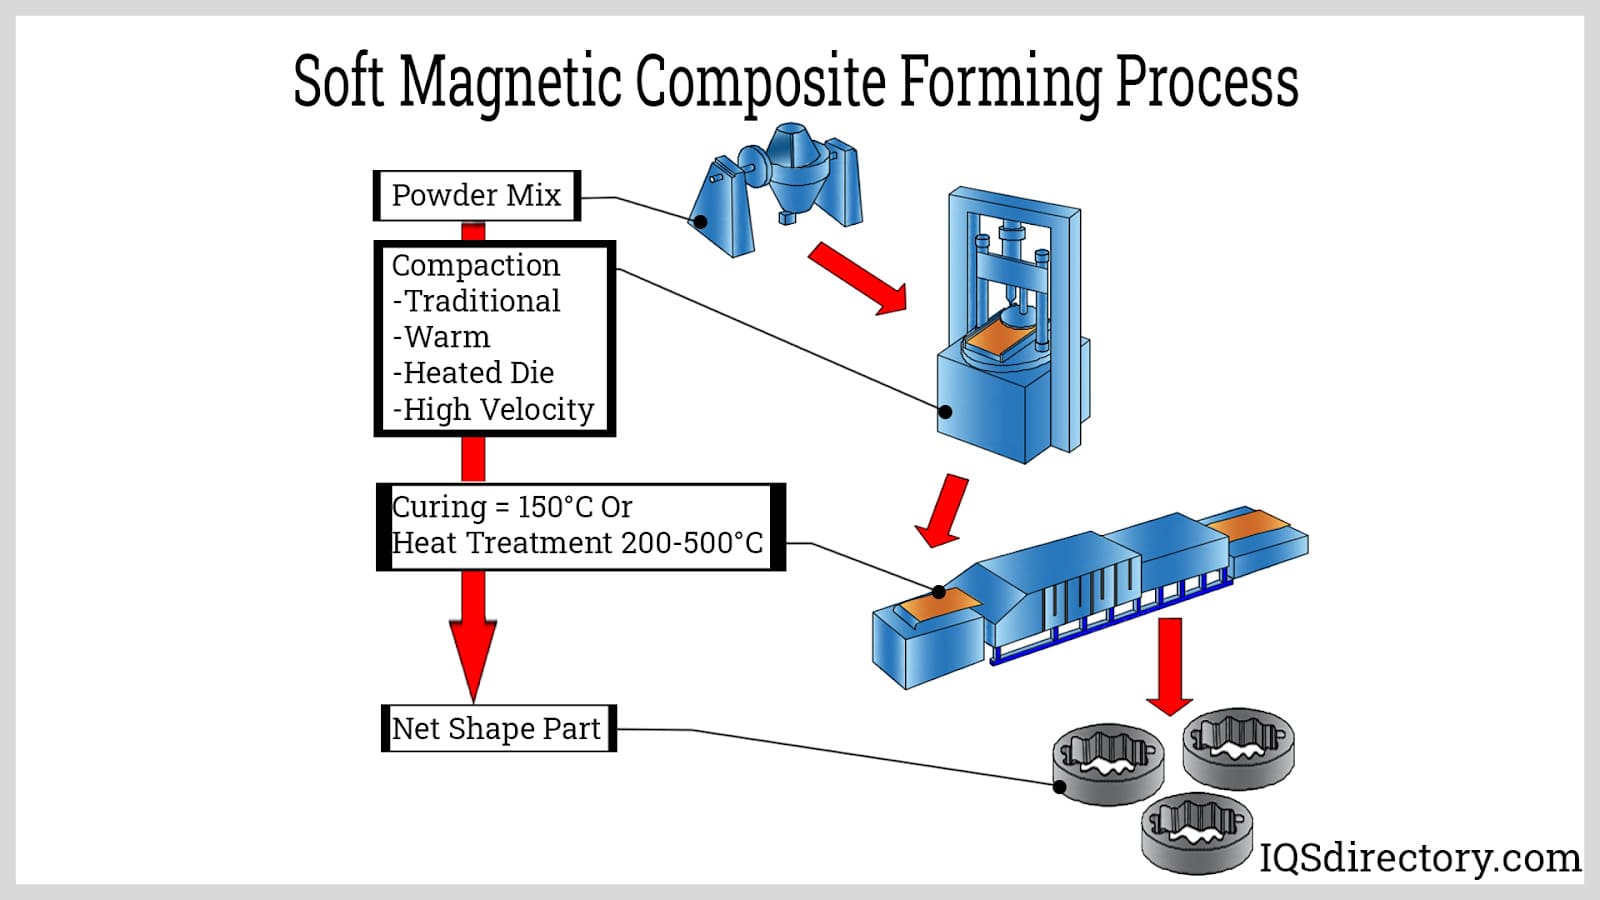 Soft Magnetic Composite Forming Process